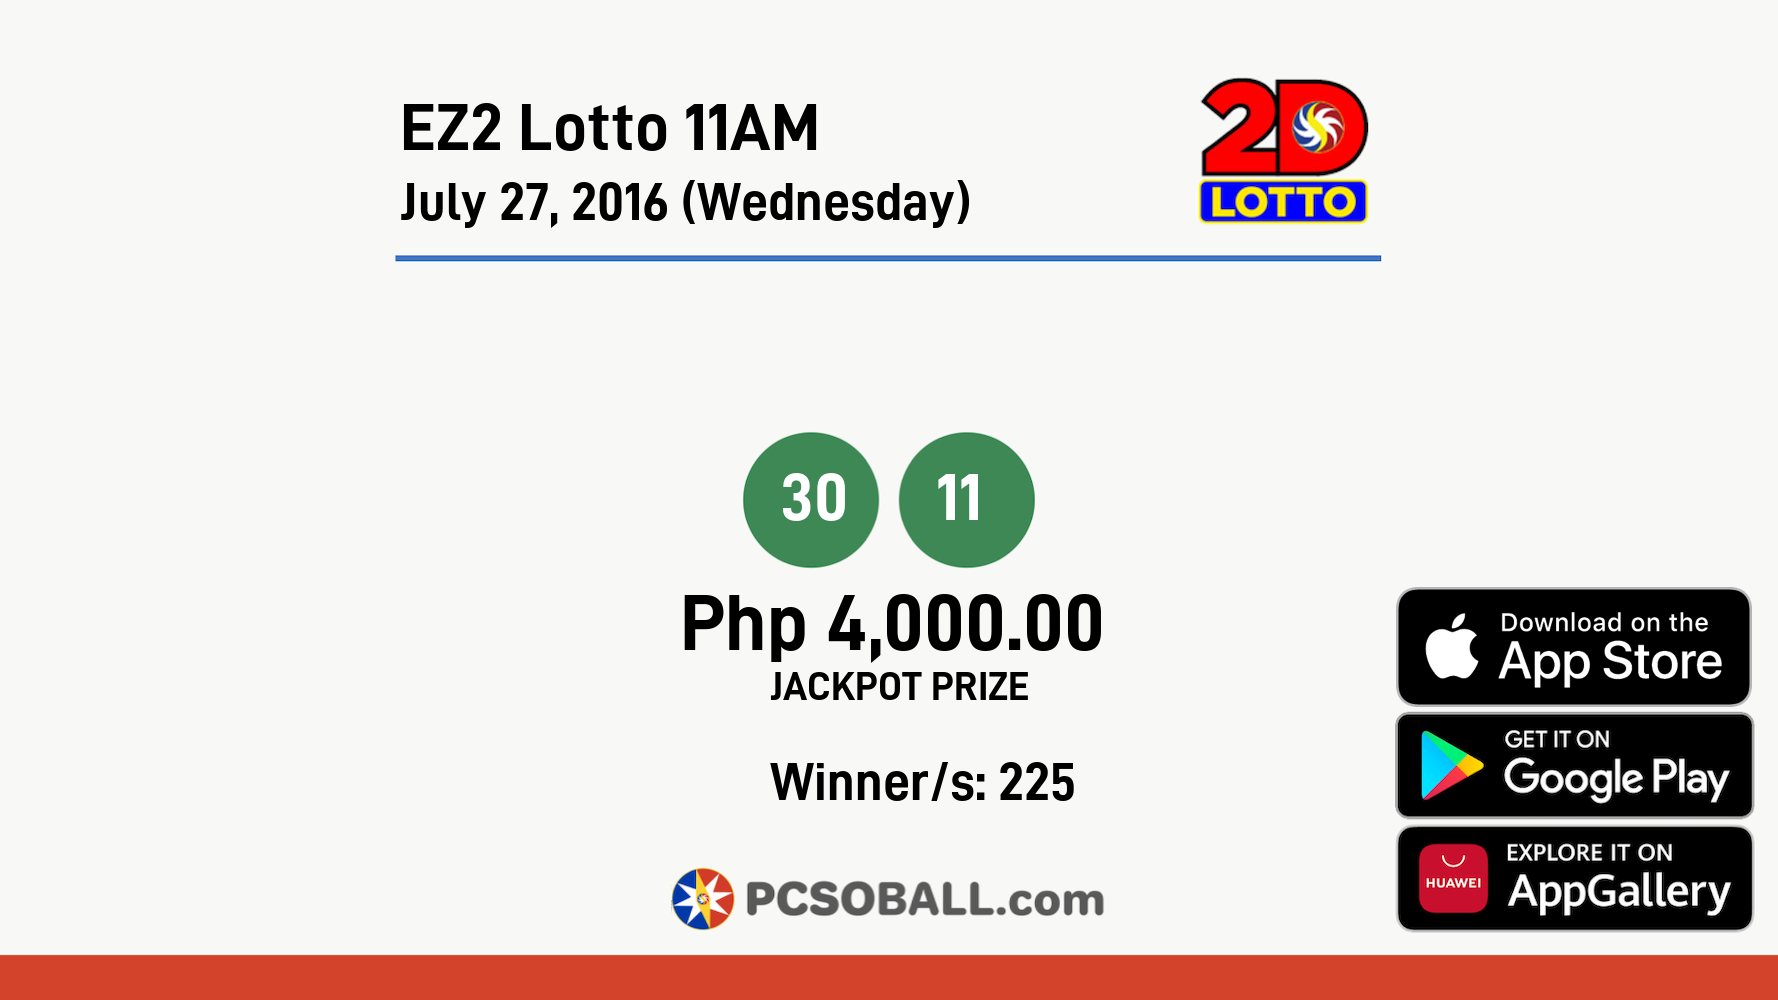 EZ2 Lotto 11AM July 27, 2016 (Wednesday) Result